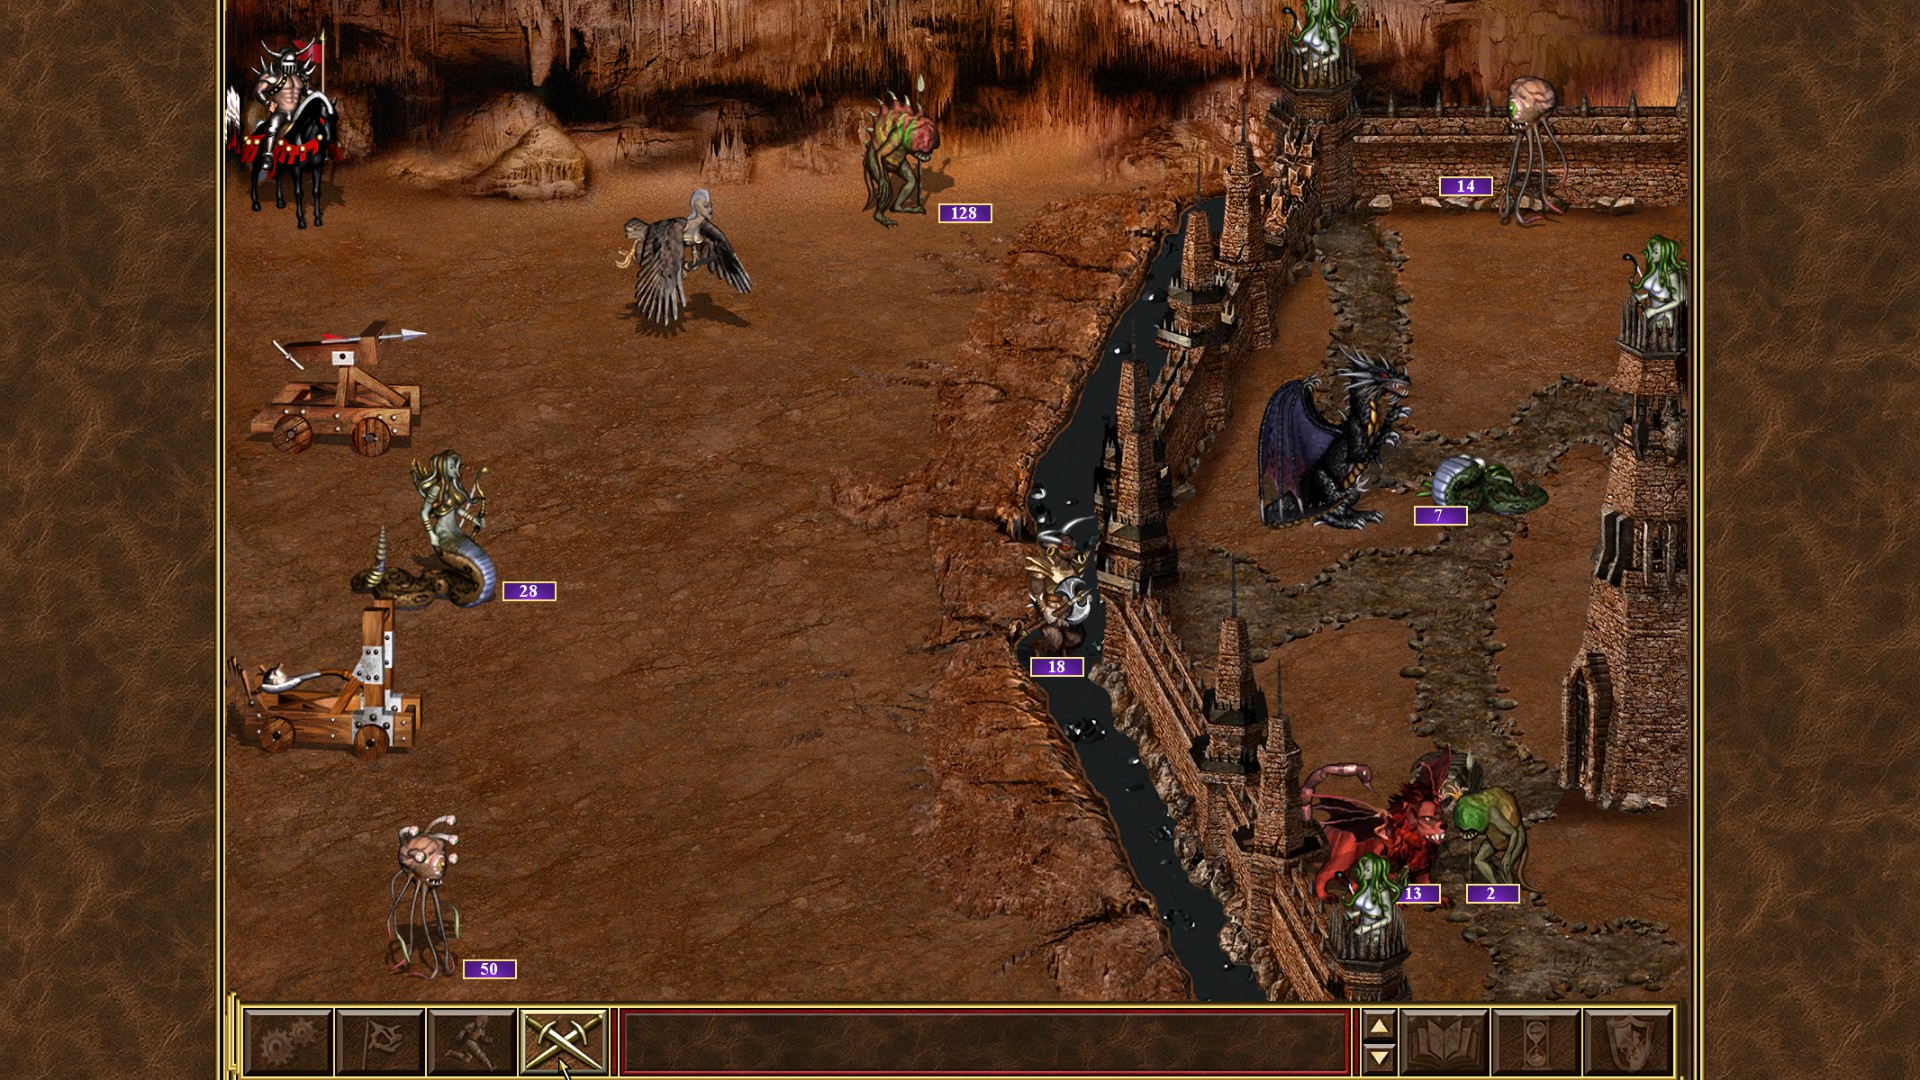 heroes of might and magic 3 online download free